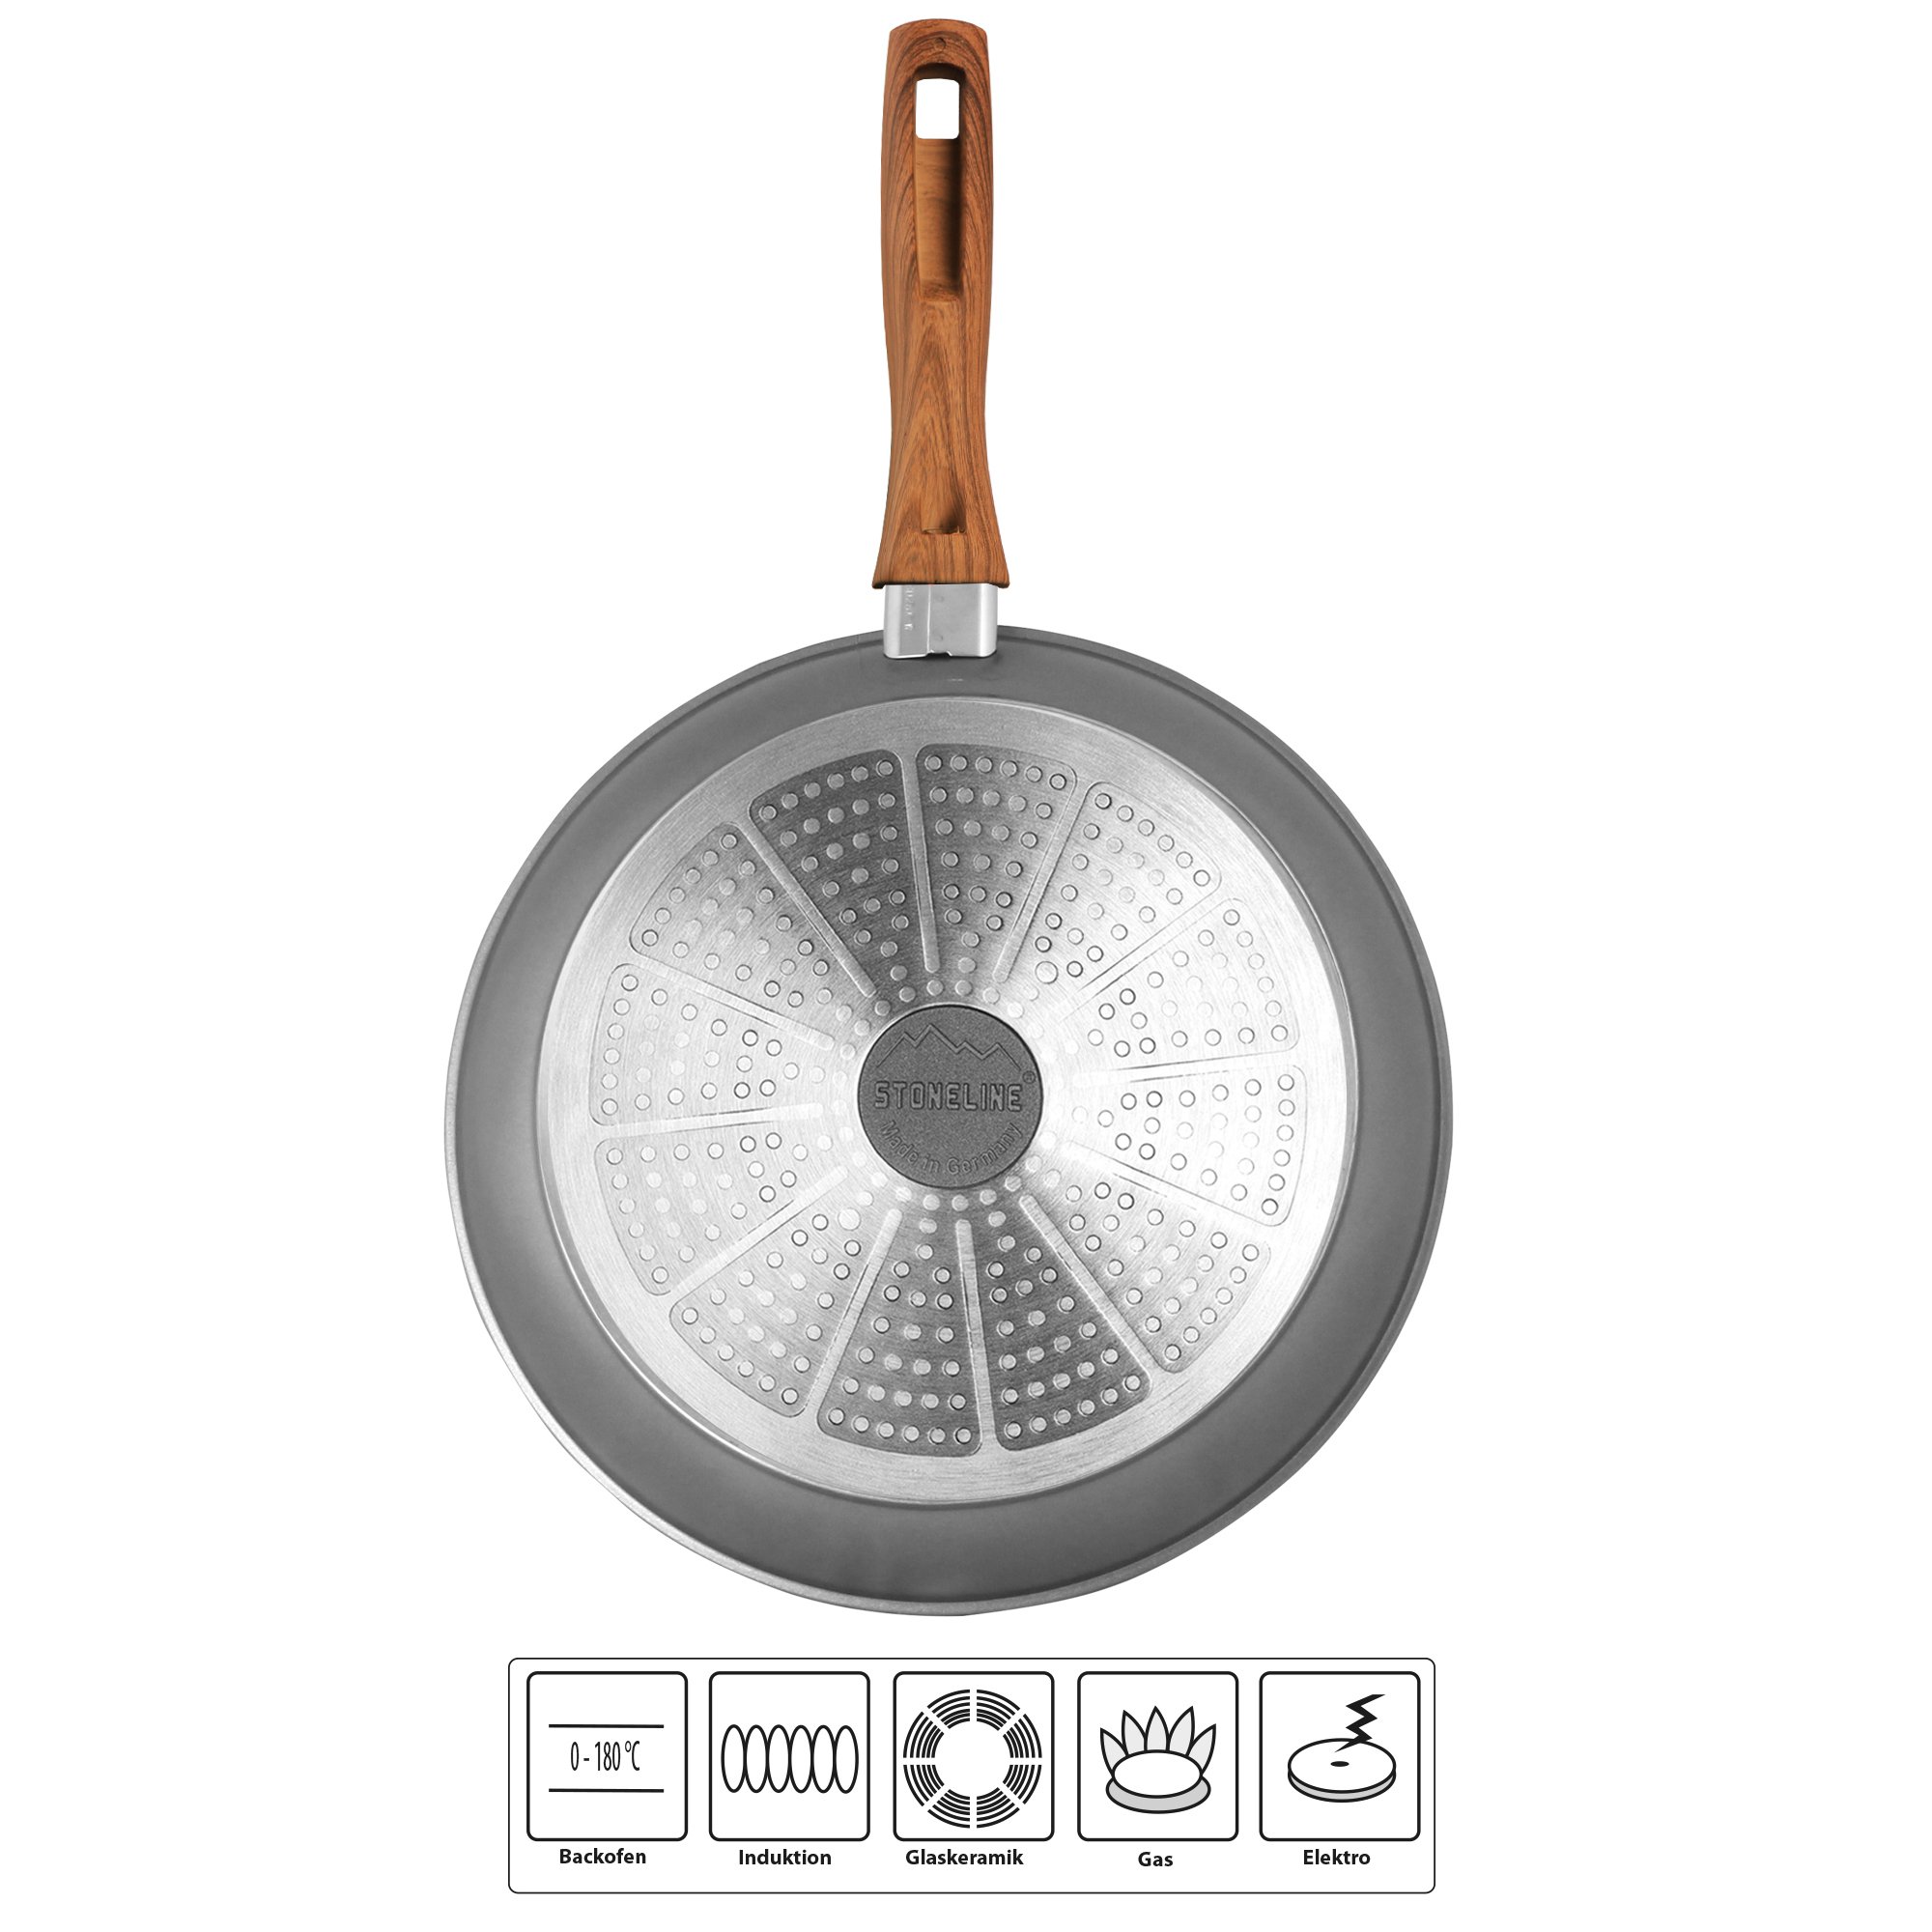 STONELINE® Deep Frying Pan 28 cm, Large Non-Stick Pan | Made in Germany | Back to Nature